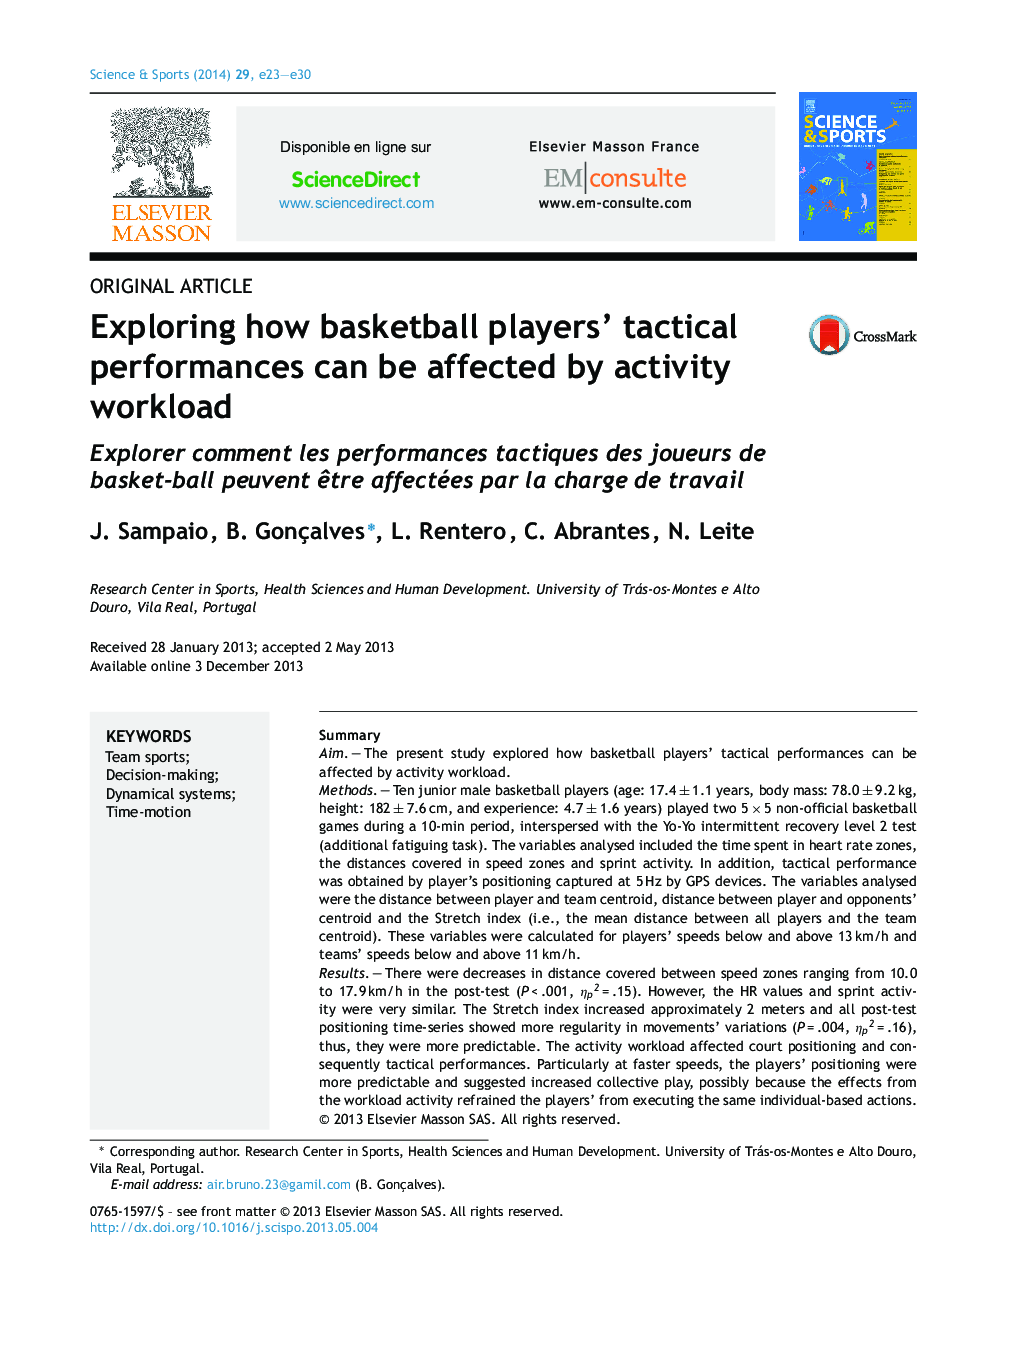 Exploring how basketball players’ tactical performances can be affected by activity workload